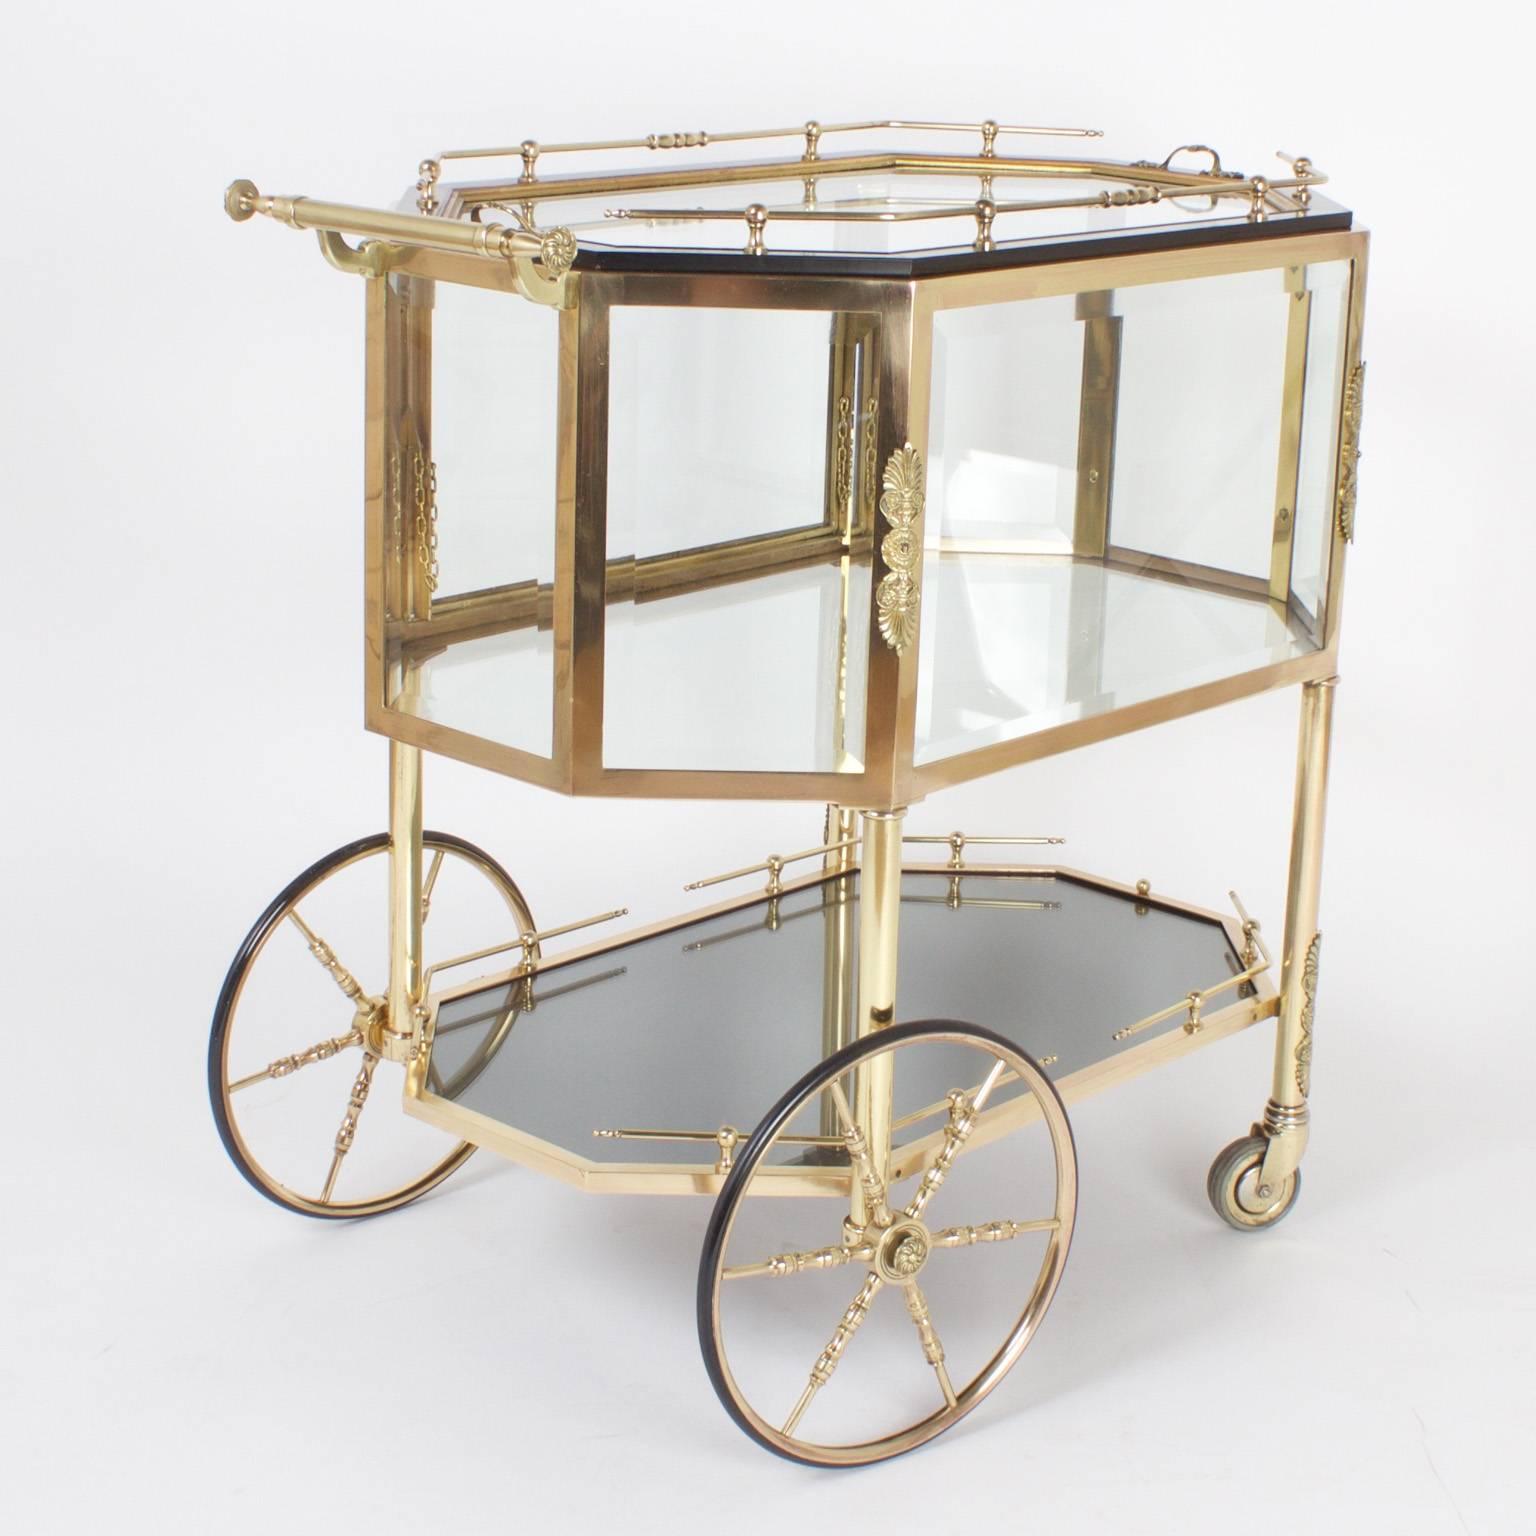 Chic, brass dessert cart or drink trolley with distinct continental flair. Featuring a removable serving tray, beveled glass display box with a hinged door, and lower plateau for extra storage all on decorative wheels. Best of its genre.
    